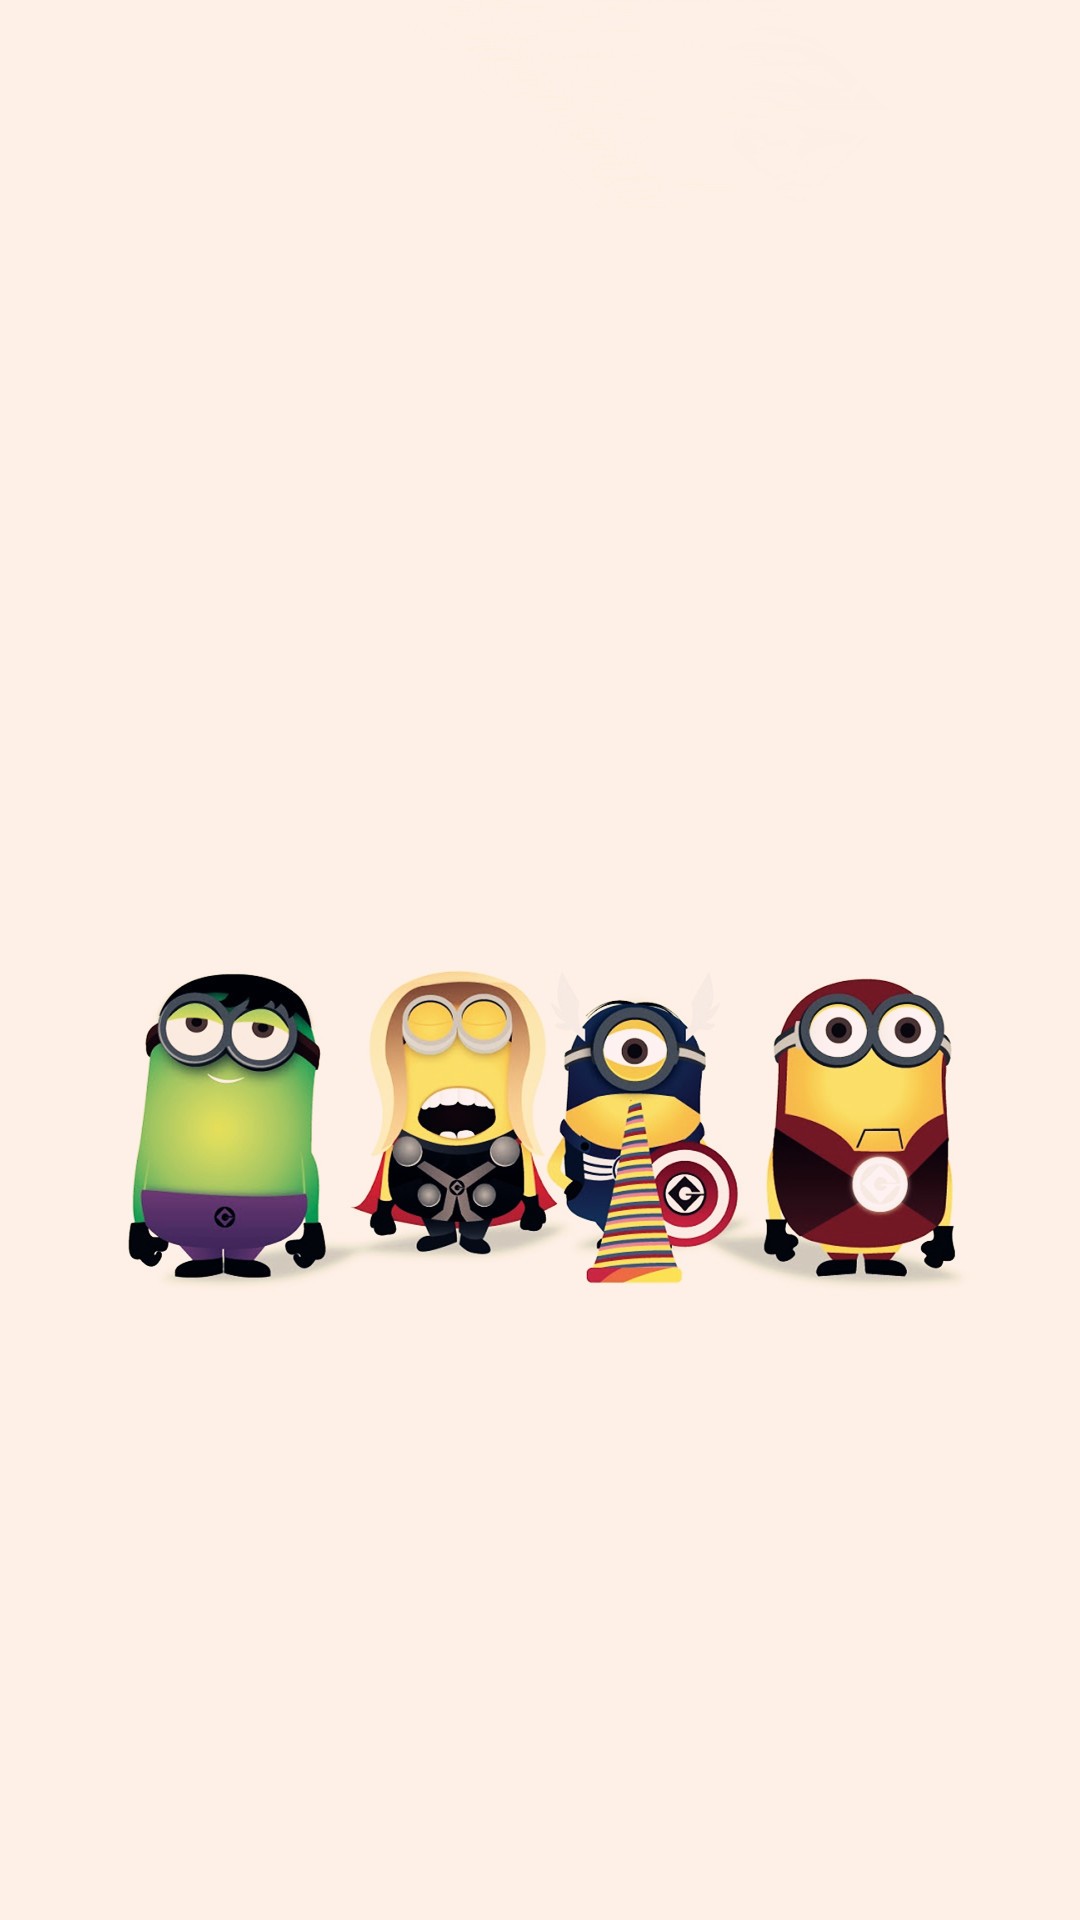 Free Download Wallpaper Weekends Mighty Minions Marvel Superheroes For Your Iphone 1080x19 For Your Desktop Mobile Tablet Explore 50 Minion Wallpaper For Iphone Despicable Me Iphone Wallpaper Despicable Me